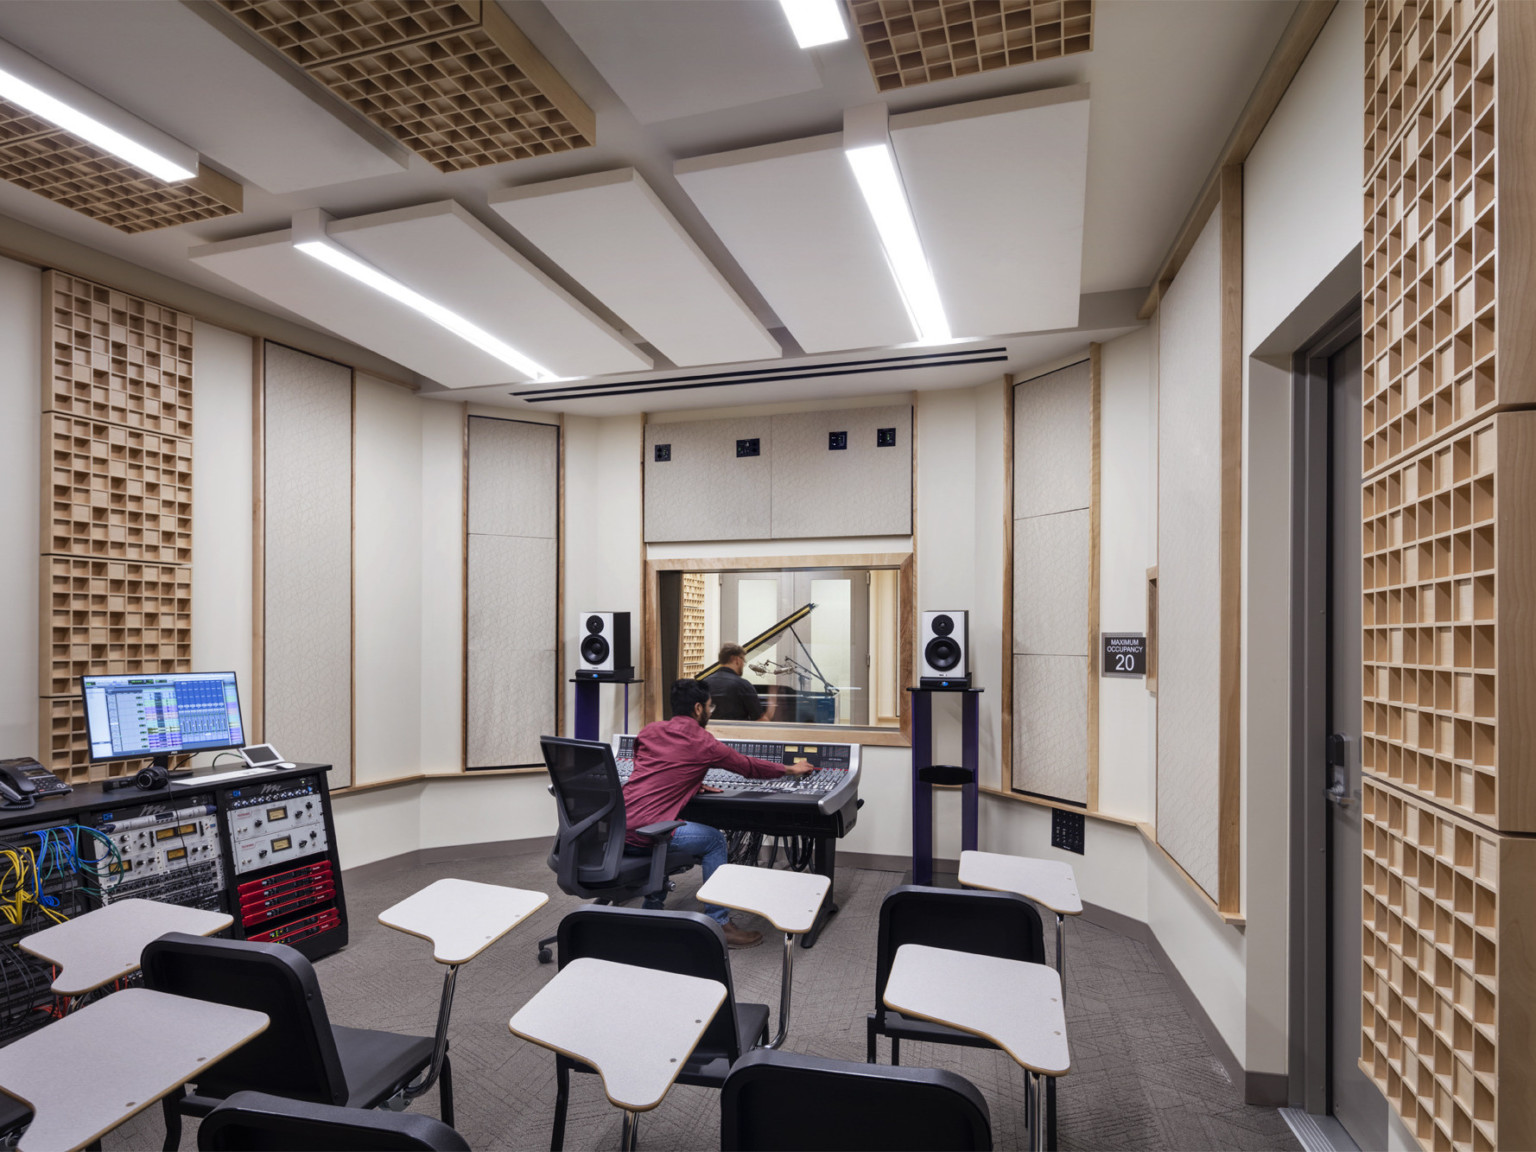 Student working in recording studio with white and wood panels on walls and ceiling